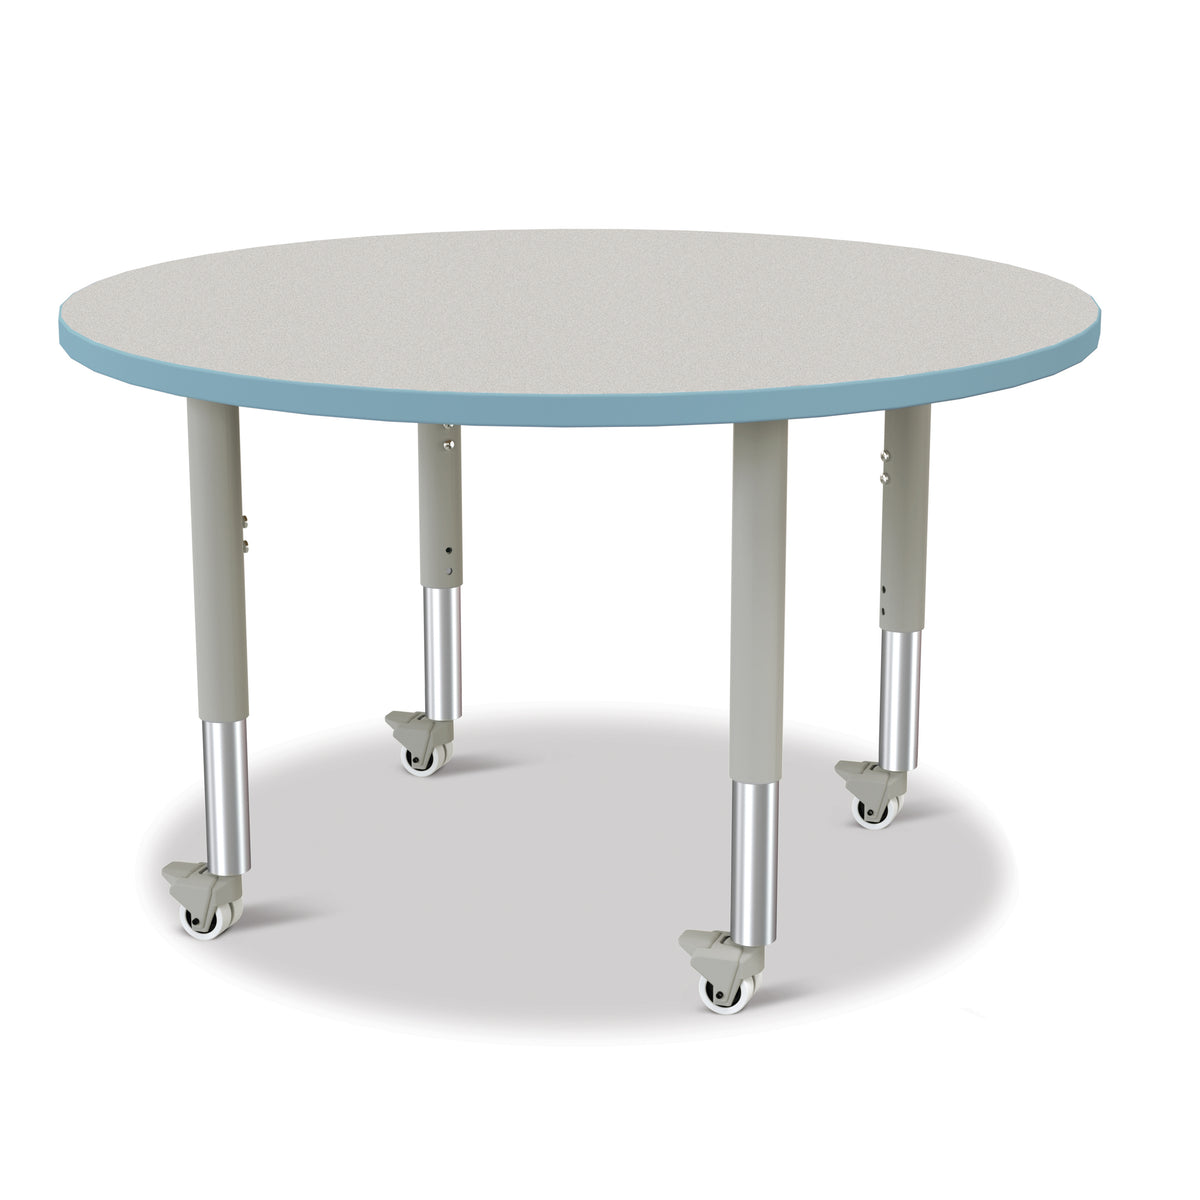 6468JCM131, Berries Round Activity Table - 42" Diameter, Mobile - Freckled Gray/Coastal Blue/Gray